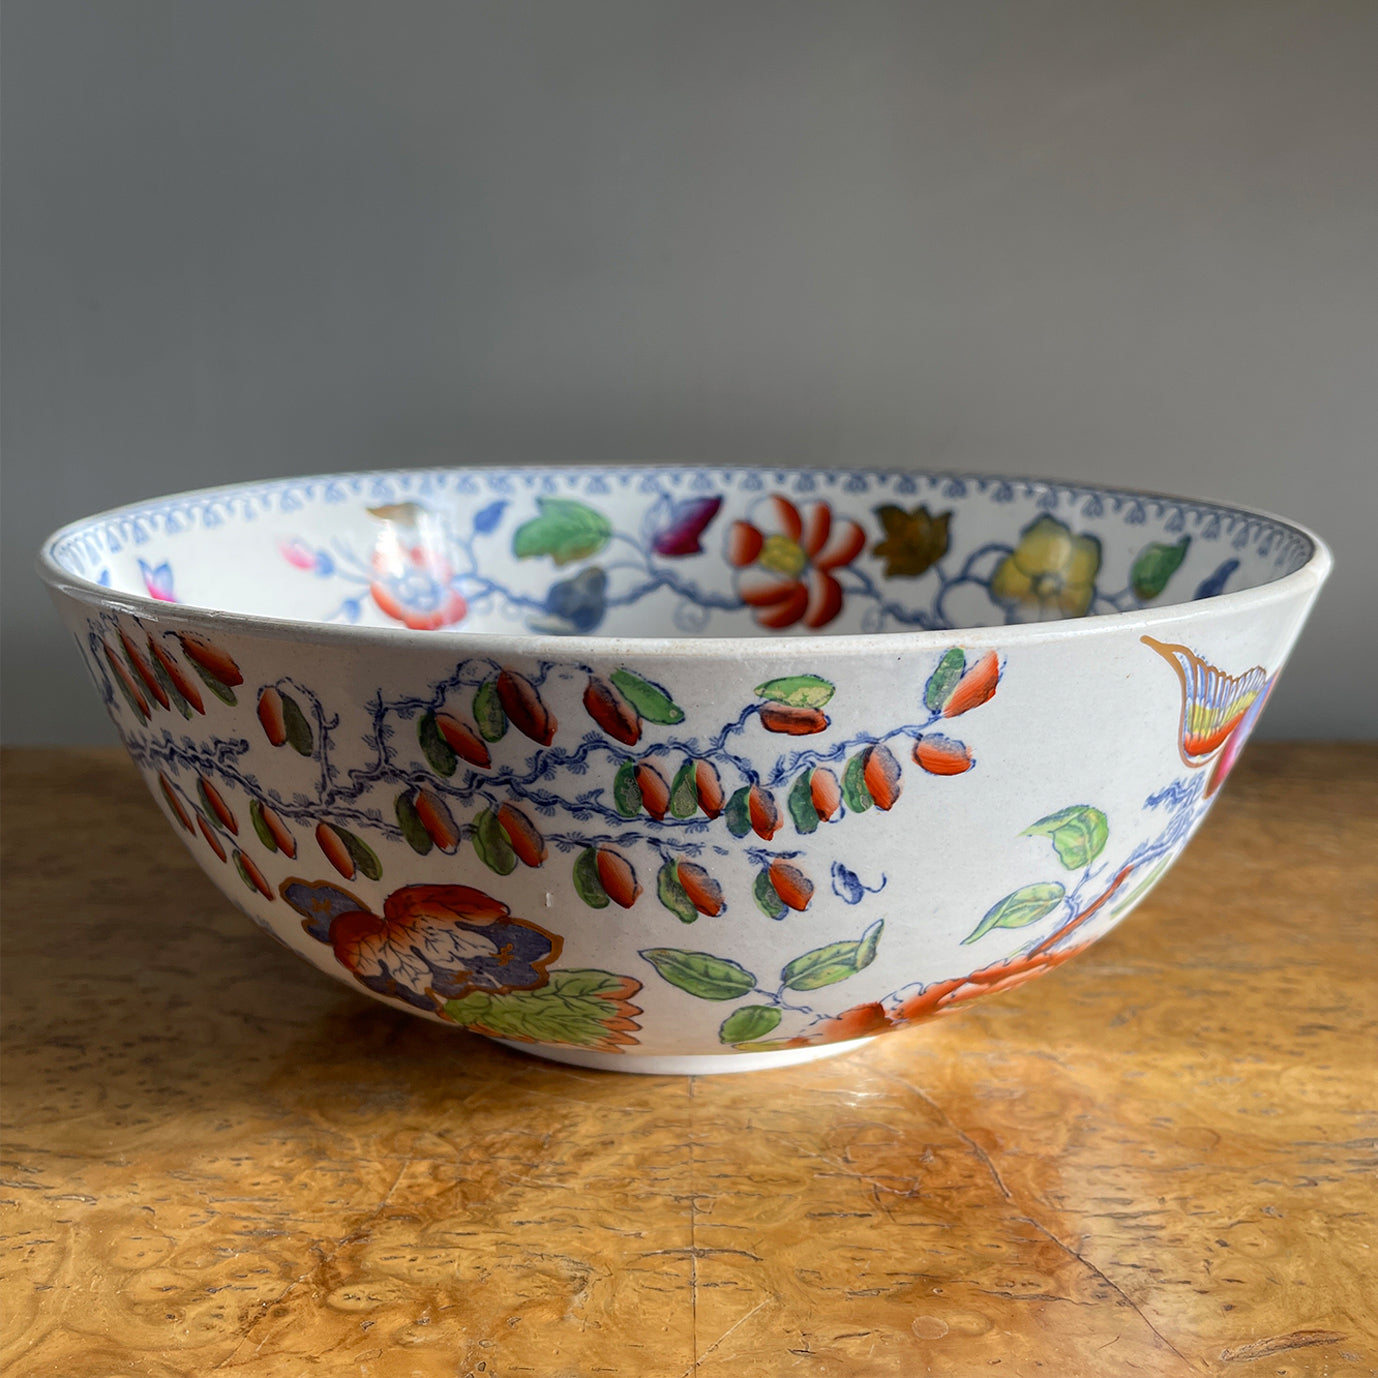 A brightly decorated Ironstone bowl in the Flying Bird pattern by the Mason's pottery. Covered in colourful flowers and pheasants, just lovely! - SHOP NOW - www.intovintage.co.uk